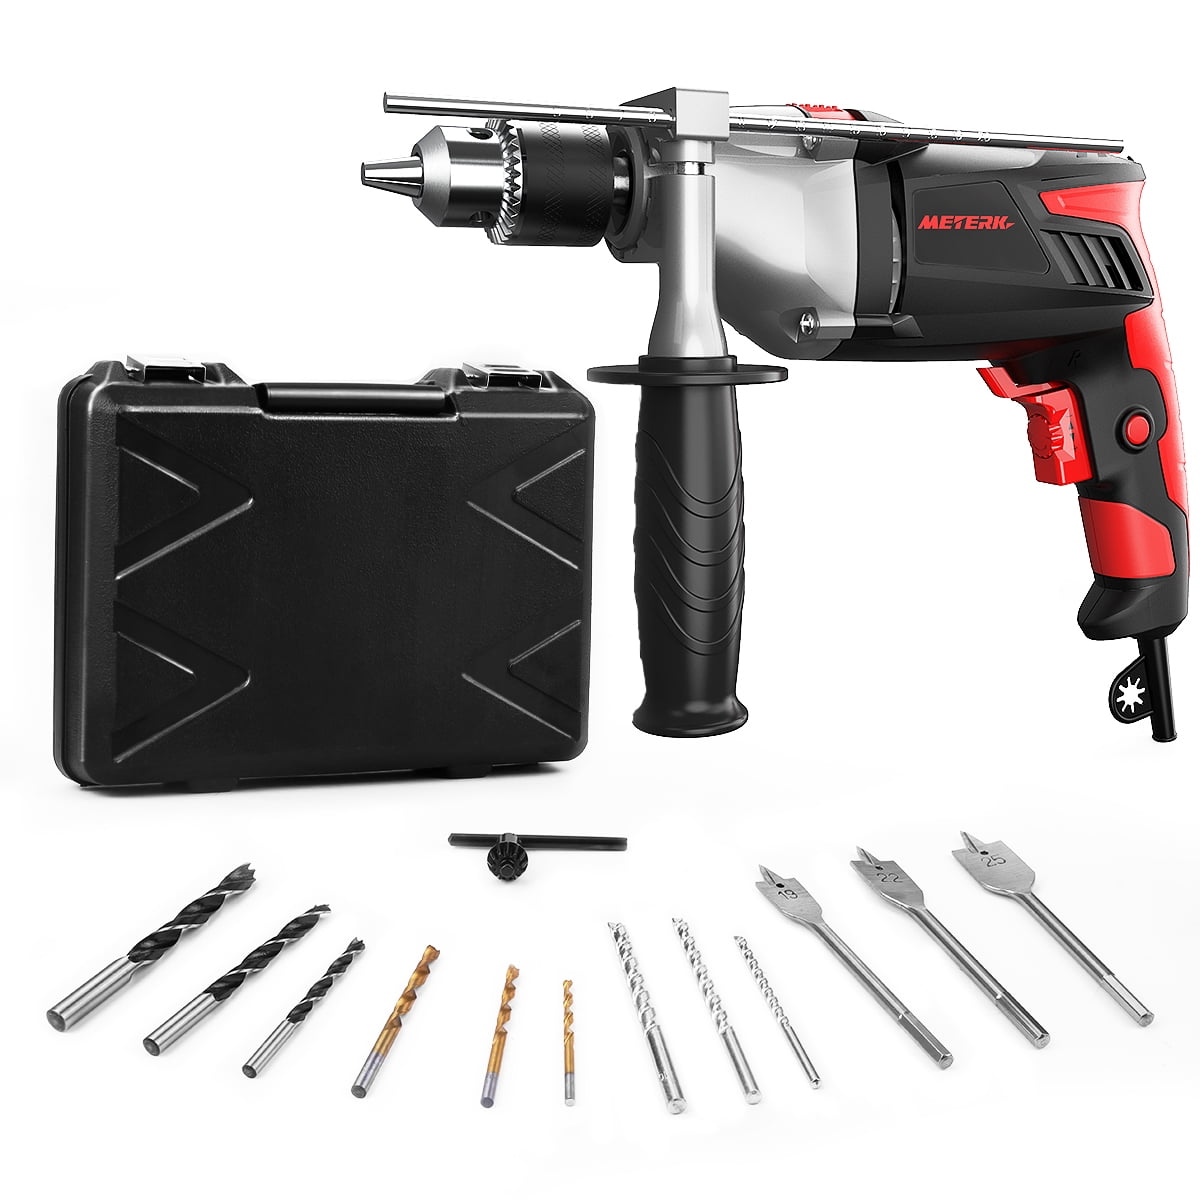 2in1 Electric Hammer Drill Corded Rotary 1000W Variable Speed 3 Drill Bits+Case